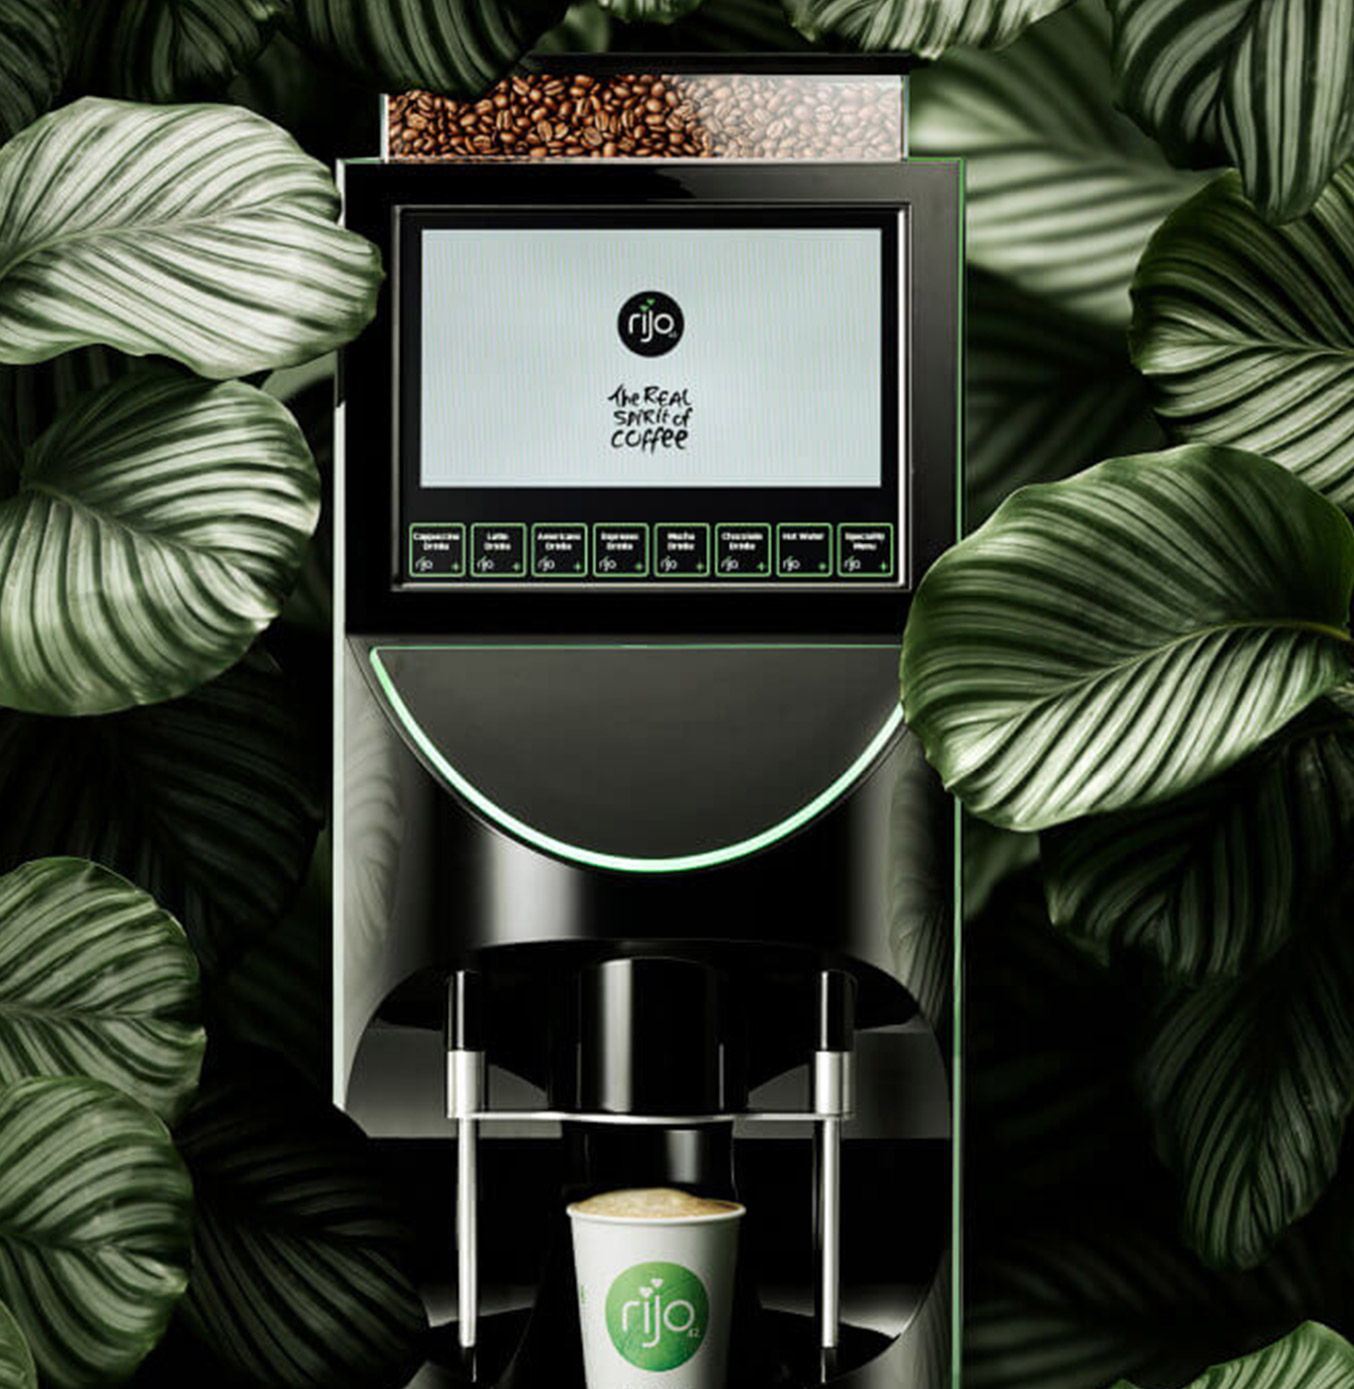 rijo42 coffee machine surrounded by plants